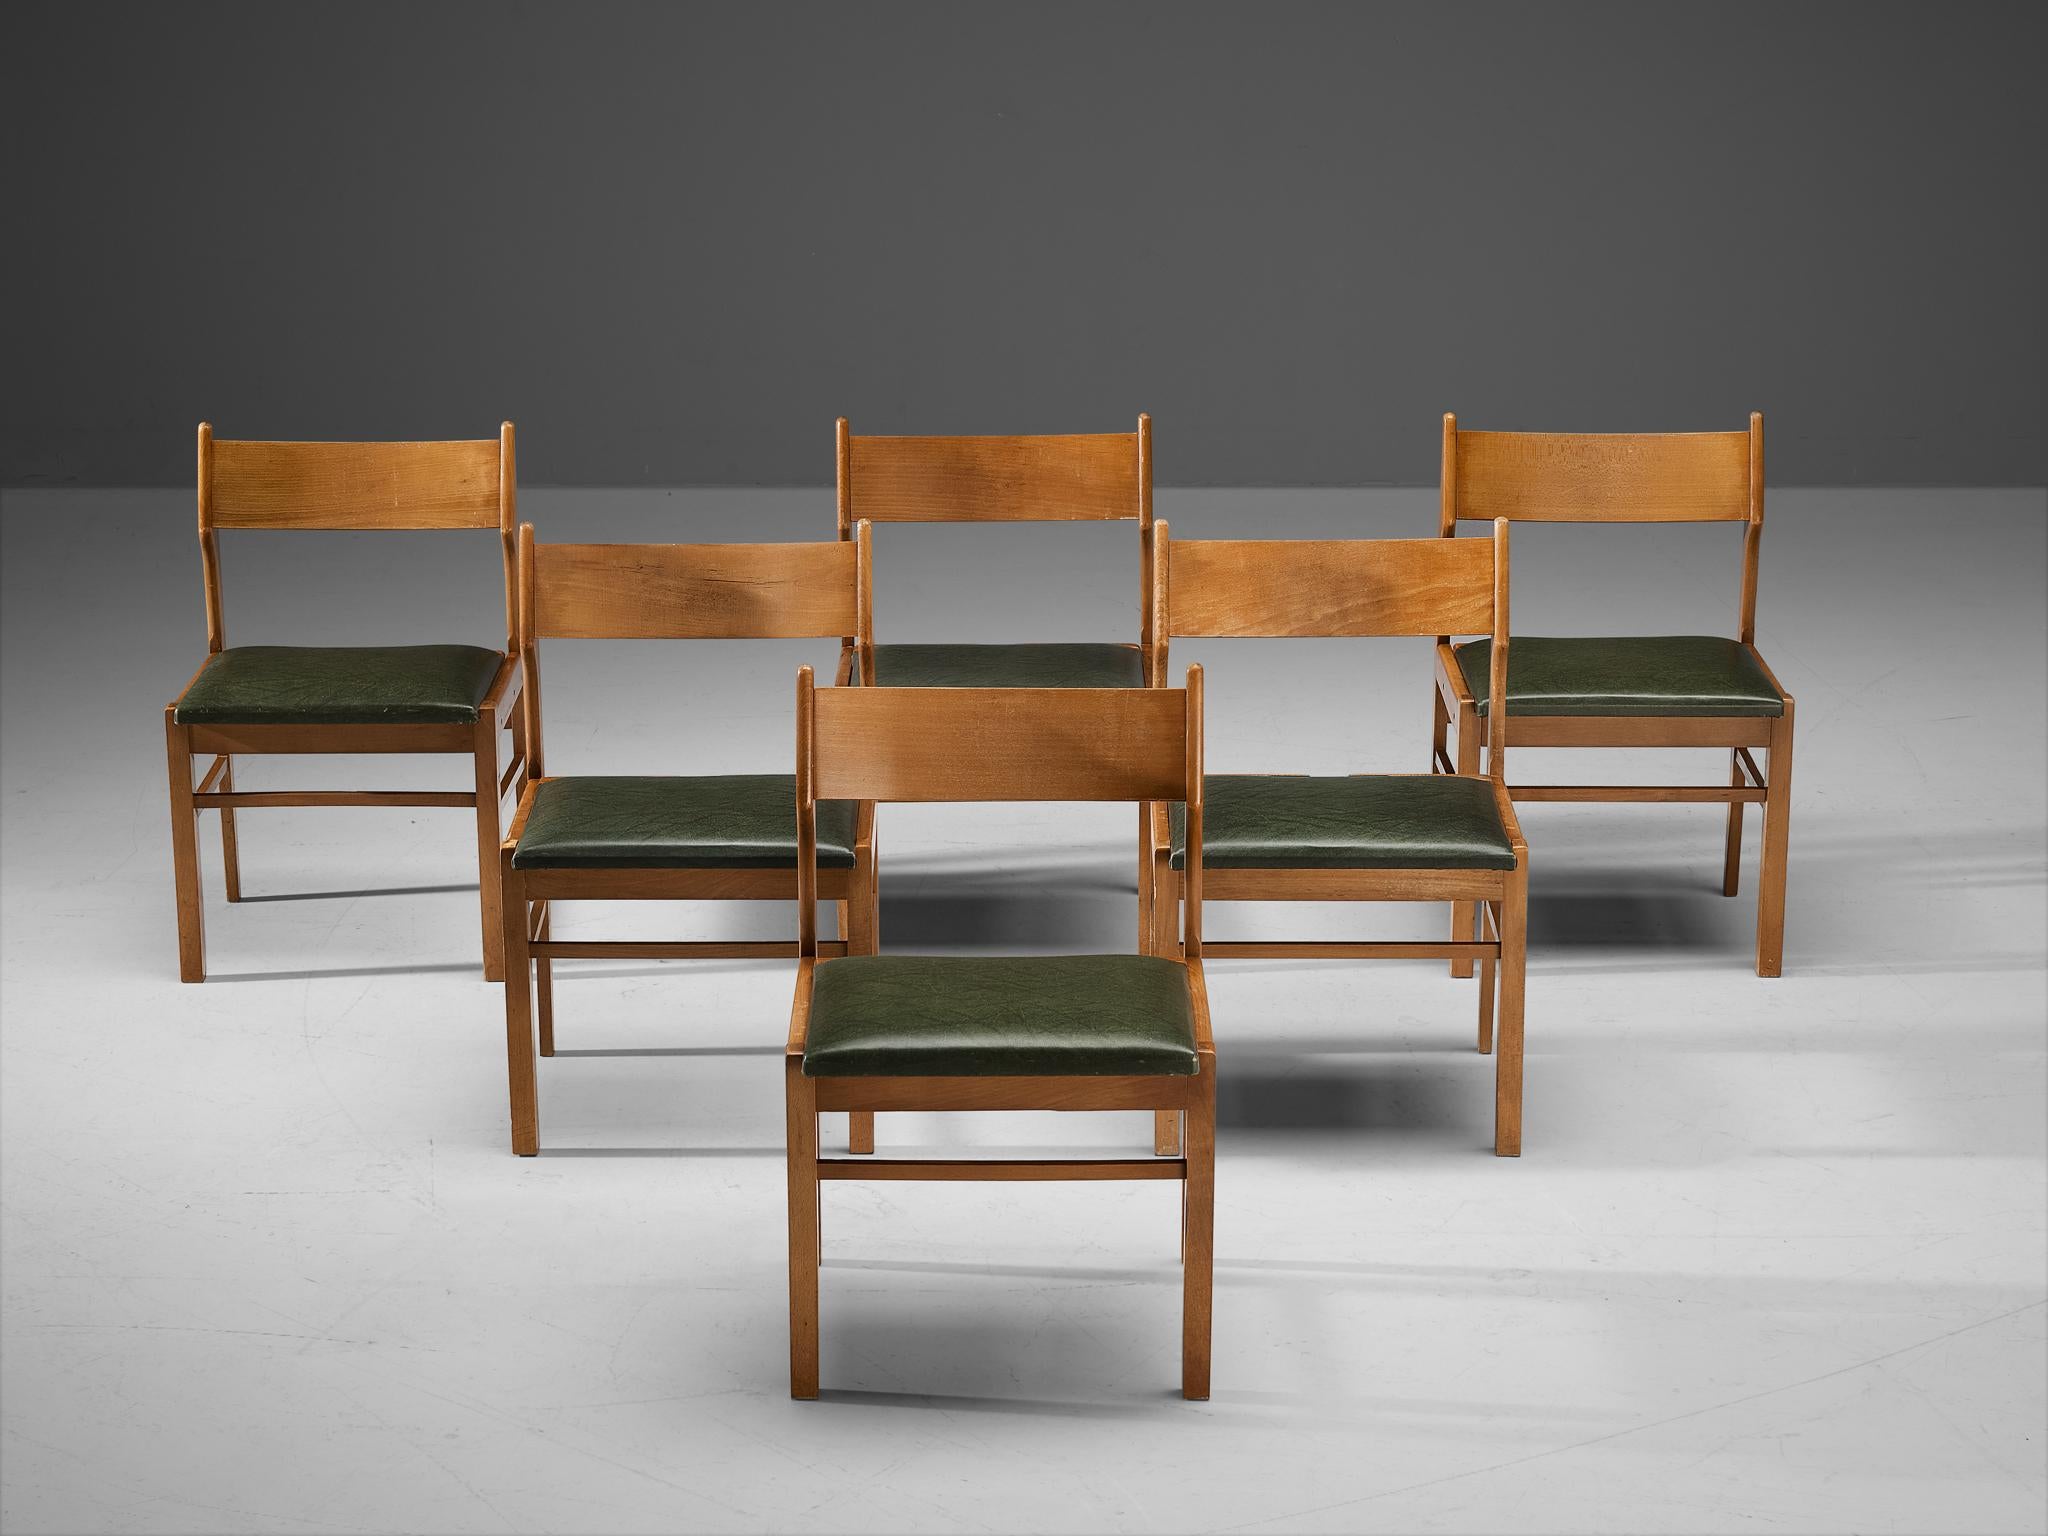 Dining chairs, wood, dark green leatherette, The Netherlands, 1960s. 

Modest set of six dining chairs. Its design shows clear lines and an open backseat. The dark green leatherette seats give a striking contrast with the warm color of the wooden